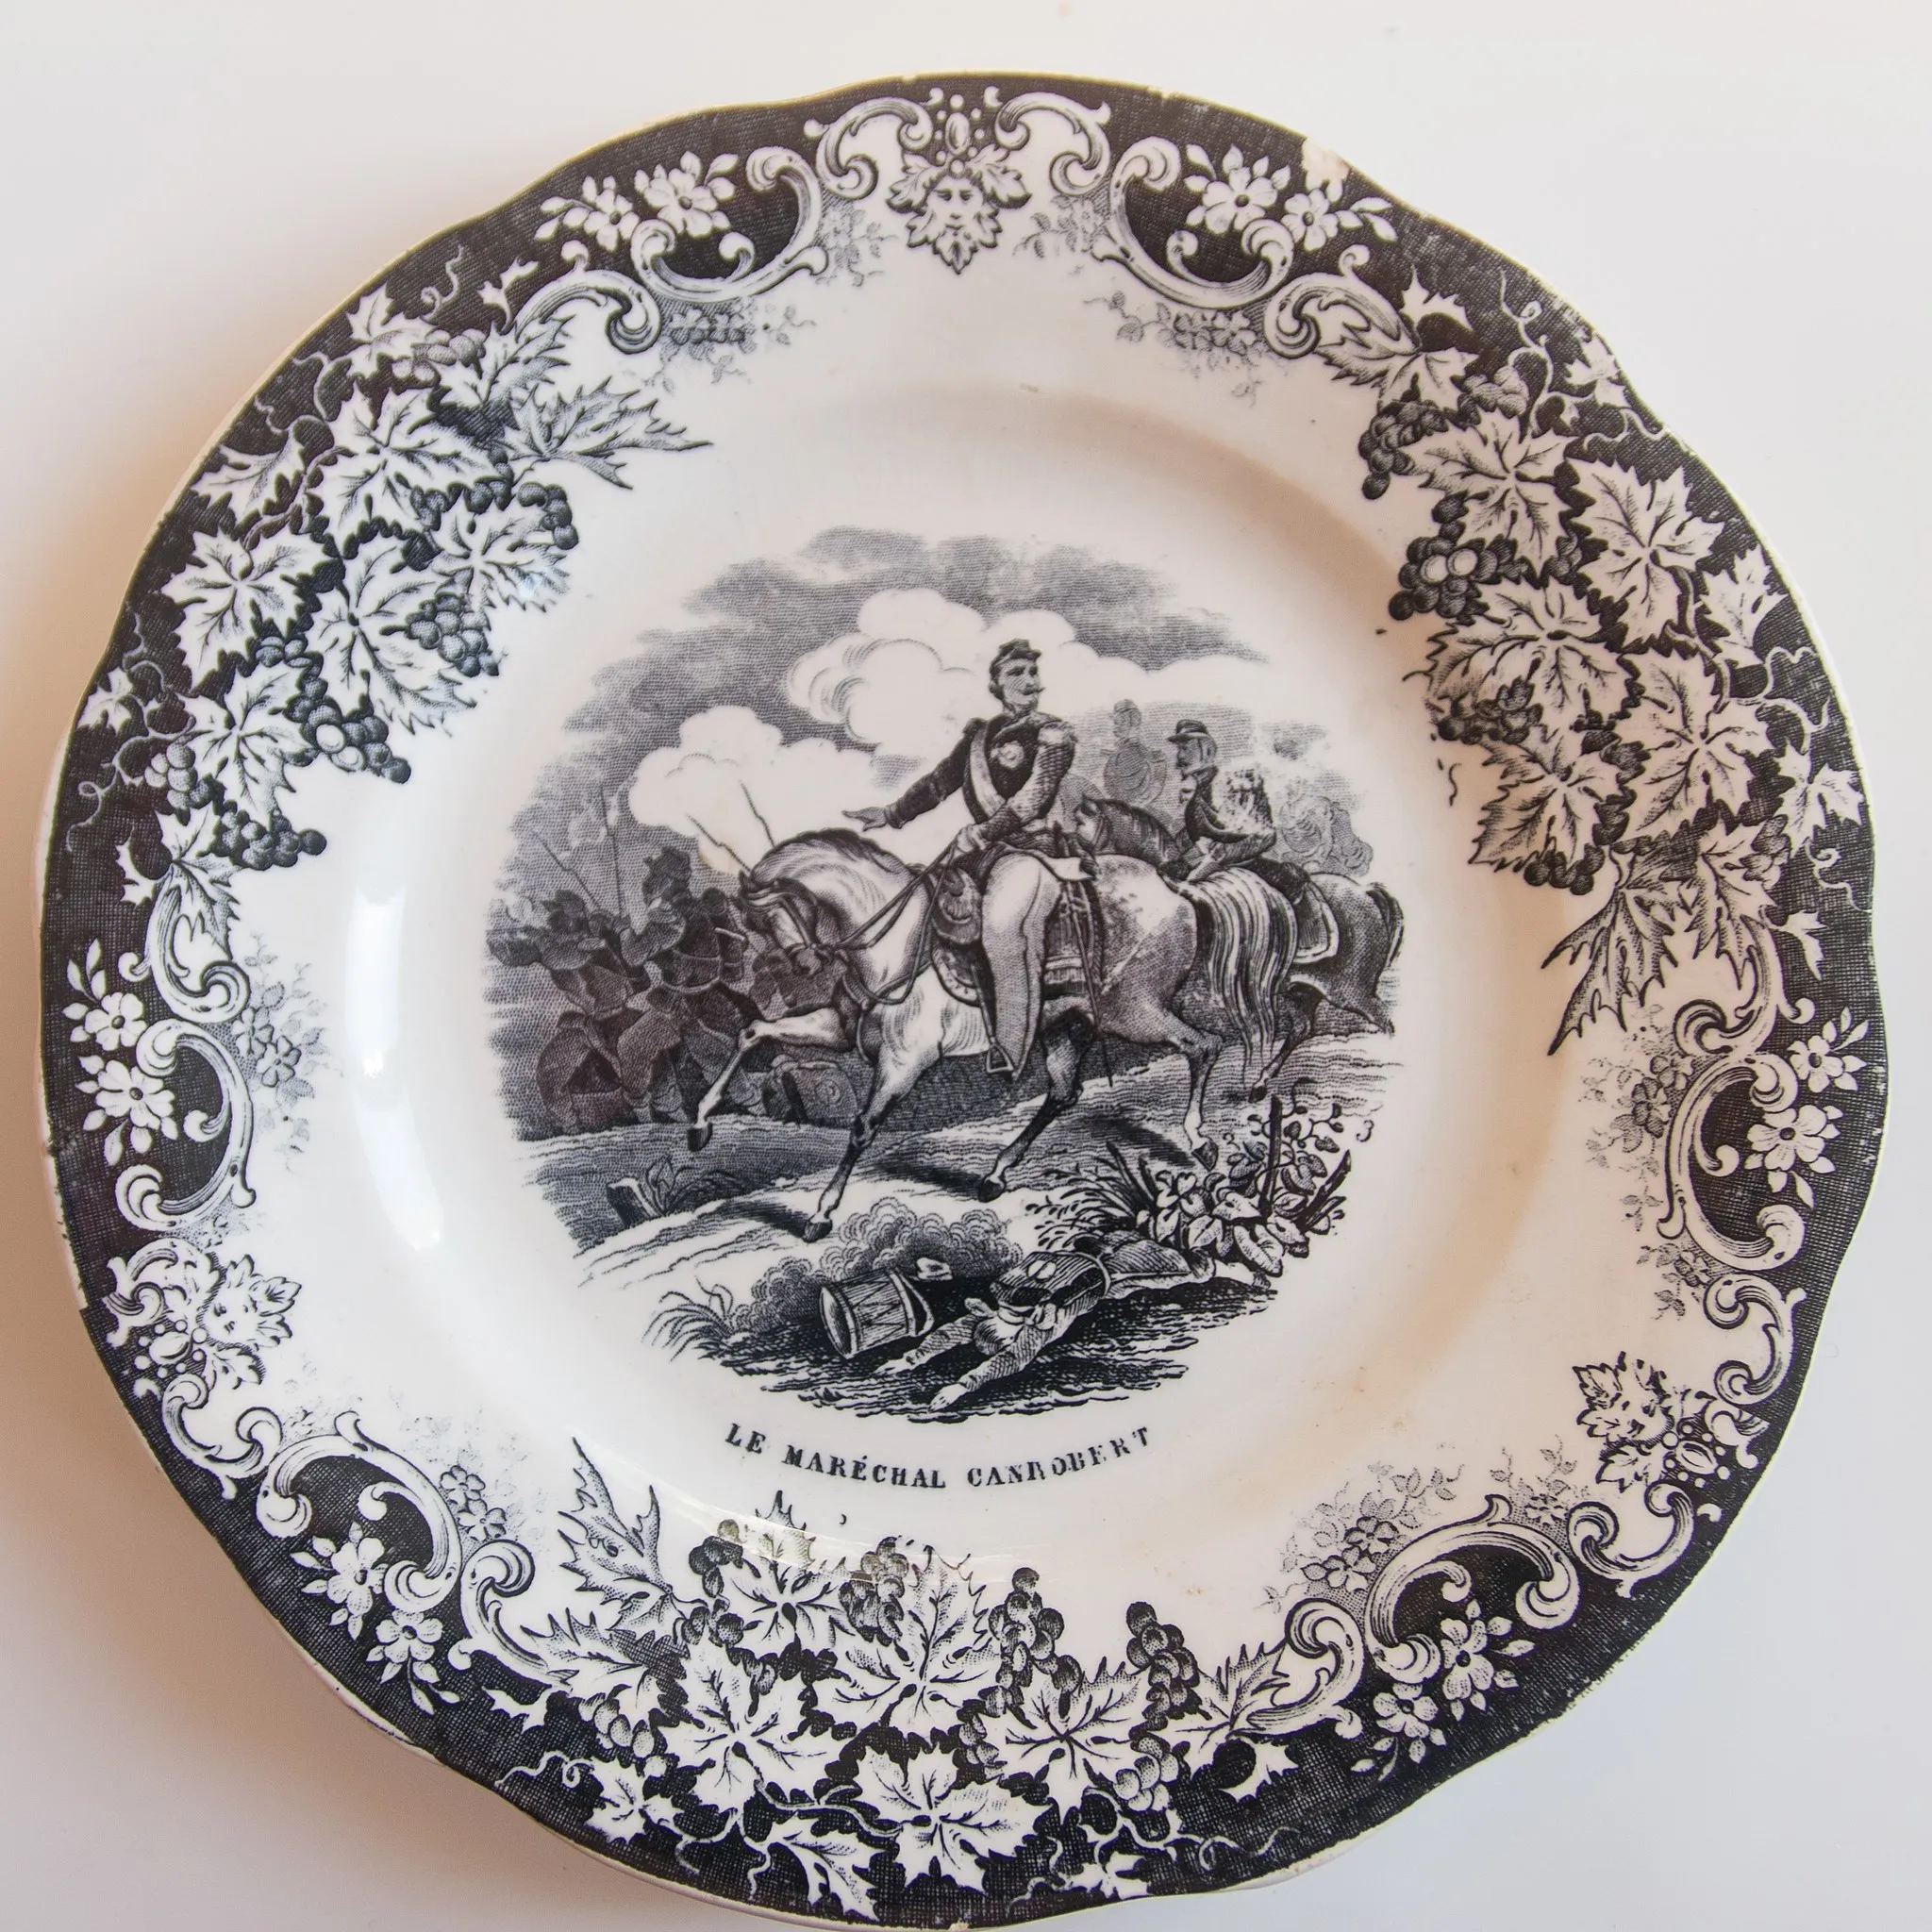 Photo showing: Commemorative plate to the glory of General de Canrobert, Marshal of France, represented at the head of his Zouaves regiment during their decisive action at the Battle of Alma. Trademark on the back: Porcelaine opaque, Fabrique E.D., Médailles 1834, 1839, 1855, Arboras .